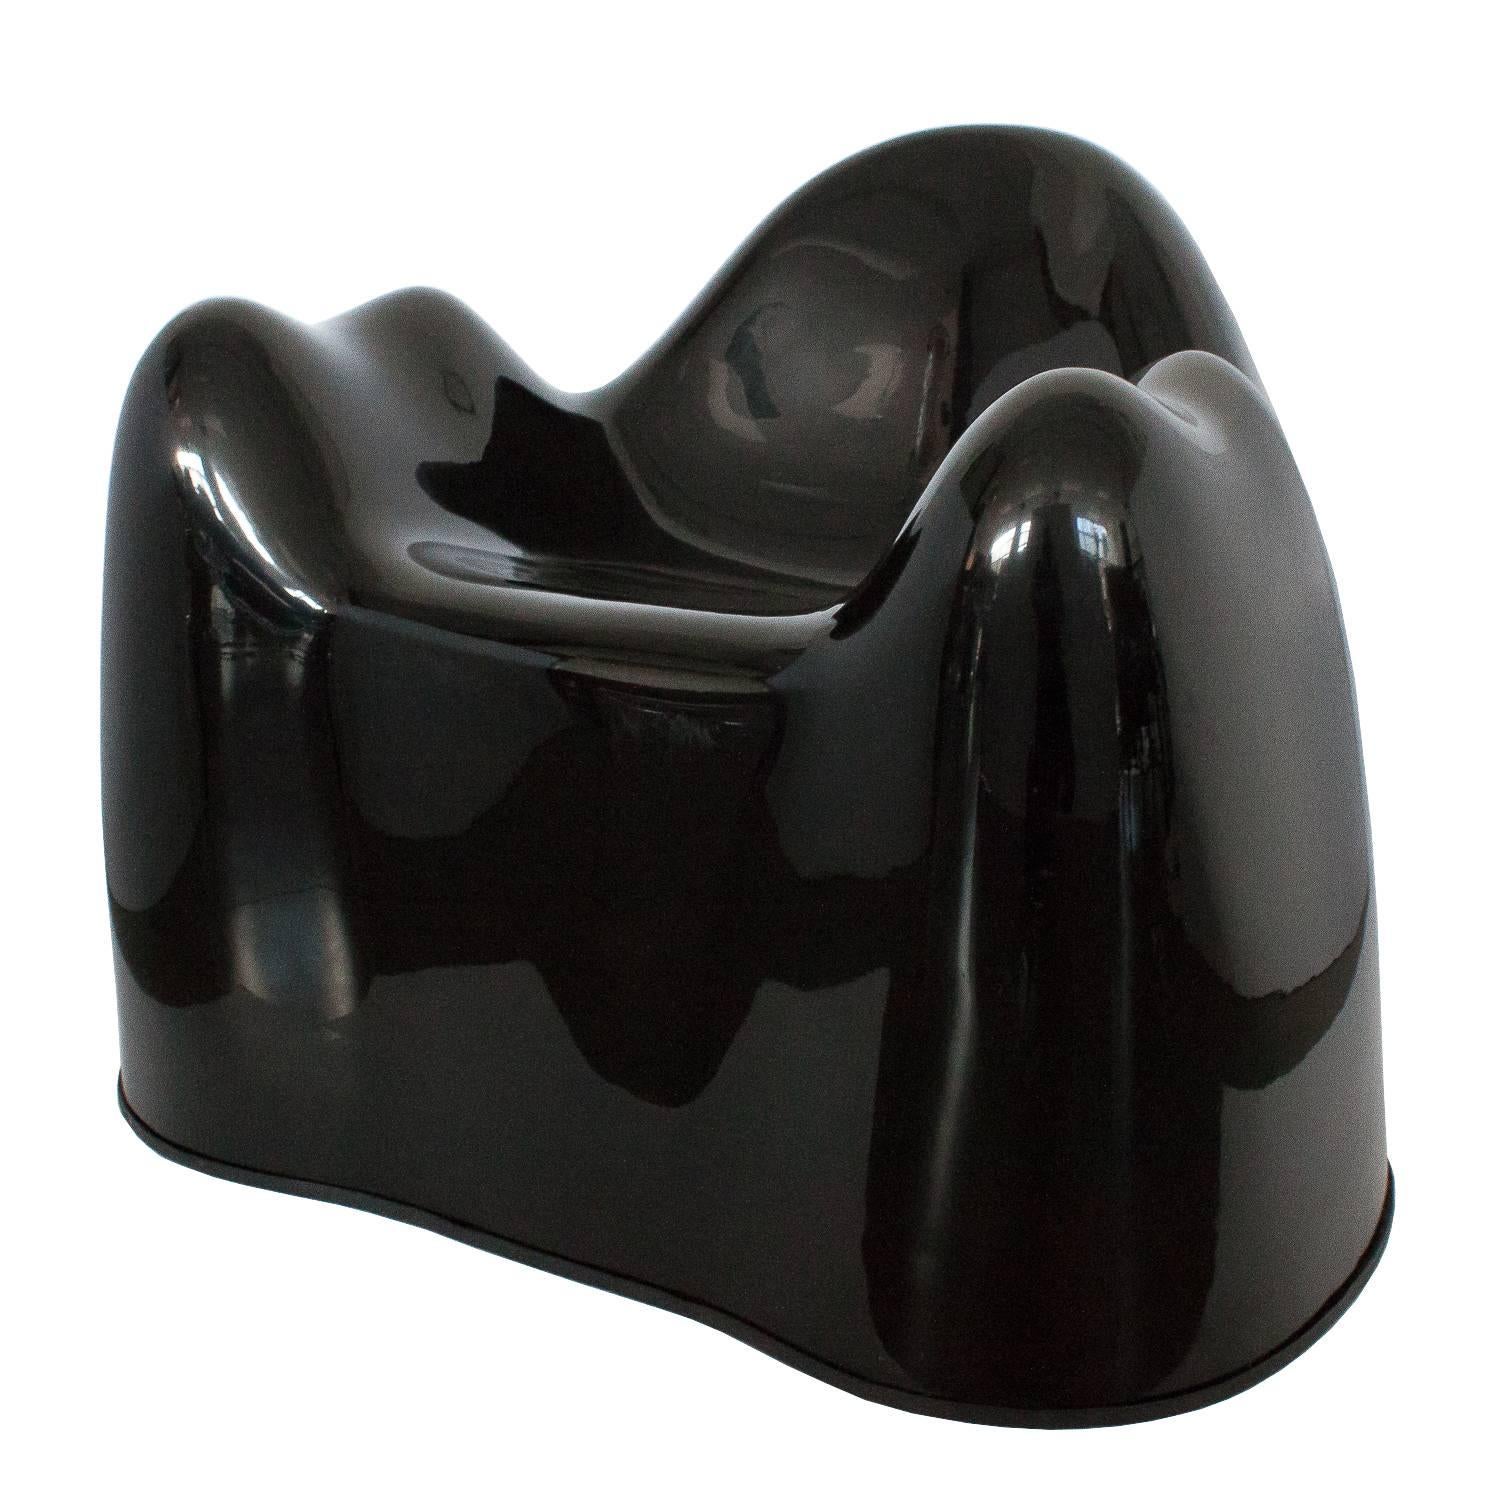 Rare pair of black molar chairs by Wendell Castle, circa 1969 and distributed by Beylerian. The chairs are comprised of gel-coated fiberglass reinforced plastic. A stunning and sculptural iconic piece of design. These chairs were part of the